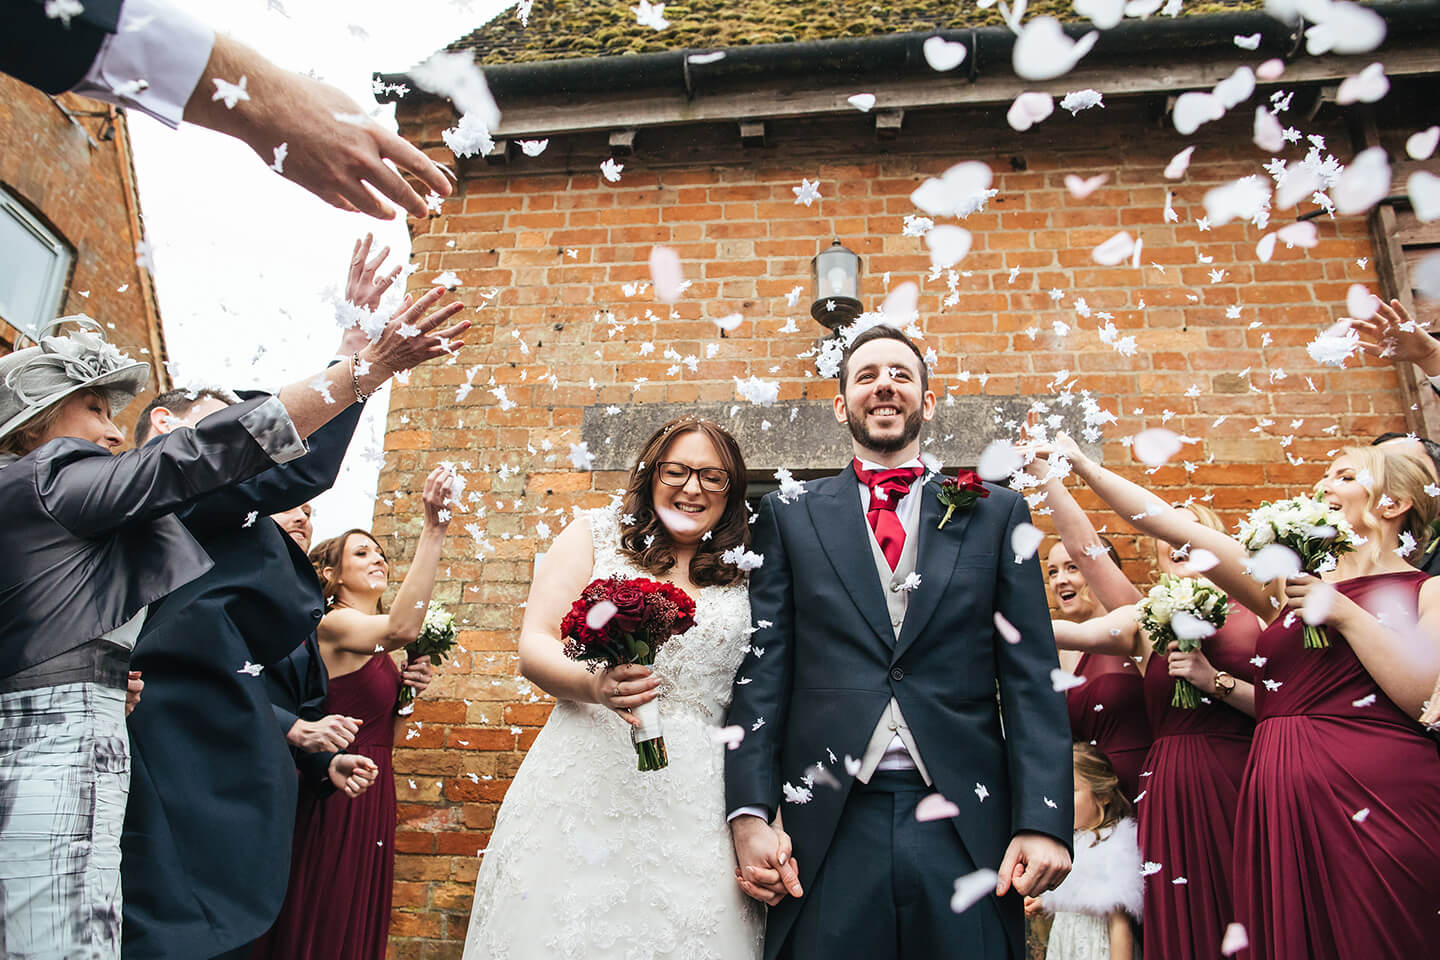 Newlyweds are showered in snowflake confetti after their winter wedding ceremony at Bassmead Manor Barns